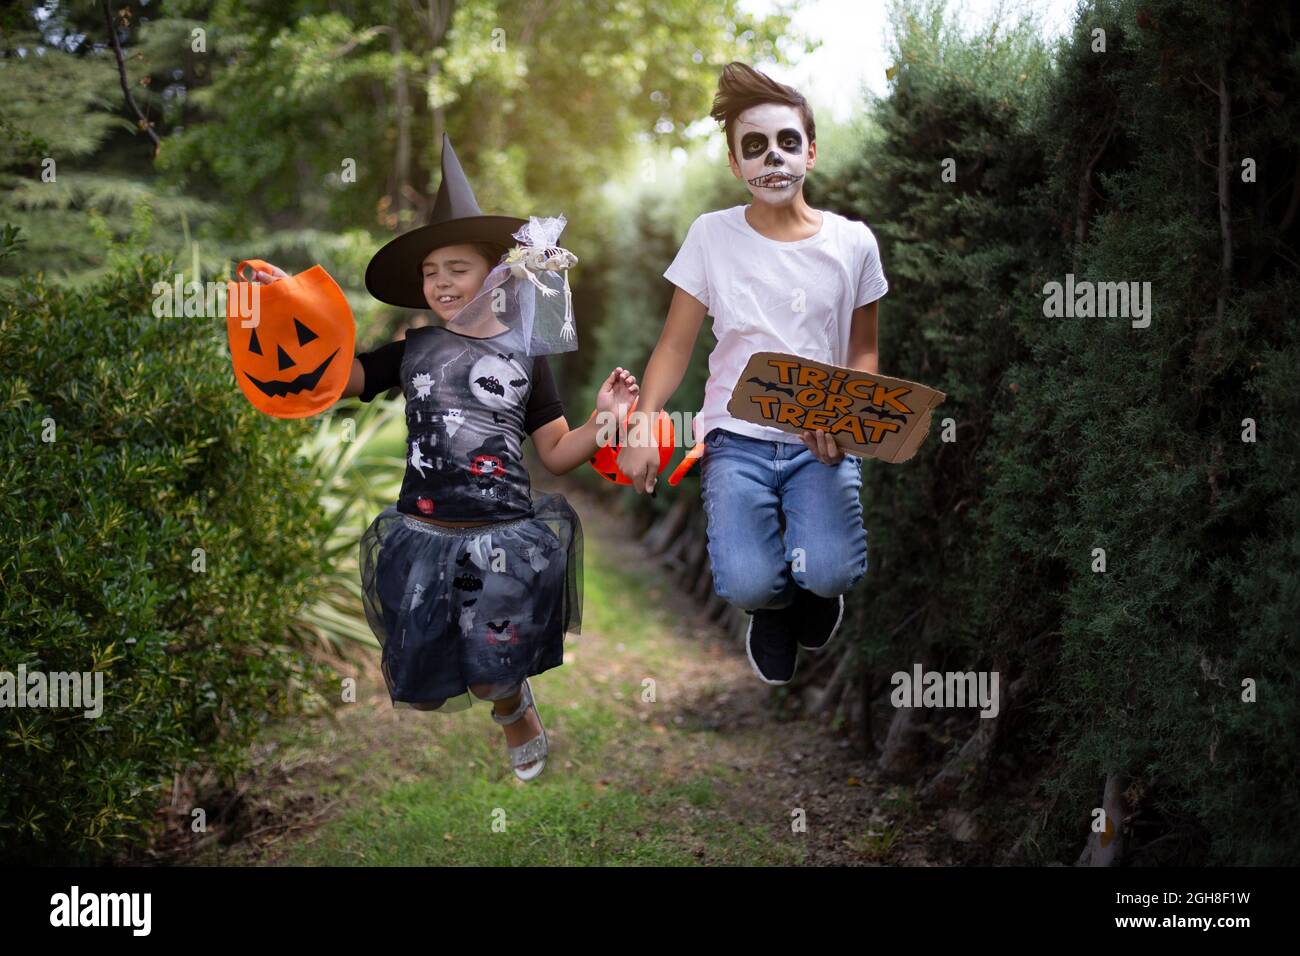 Caucasian boy and girl in typical Halloween costumes jumping and having fun outdoors. Stock Photo